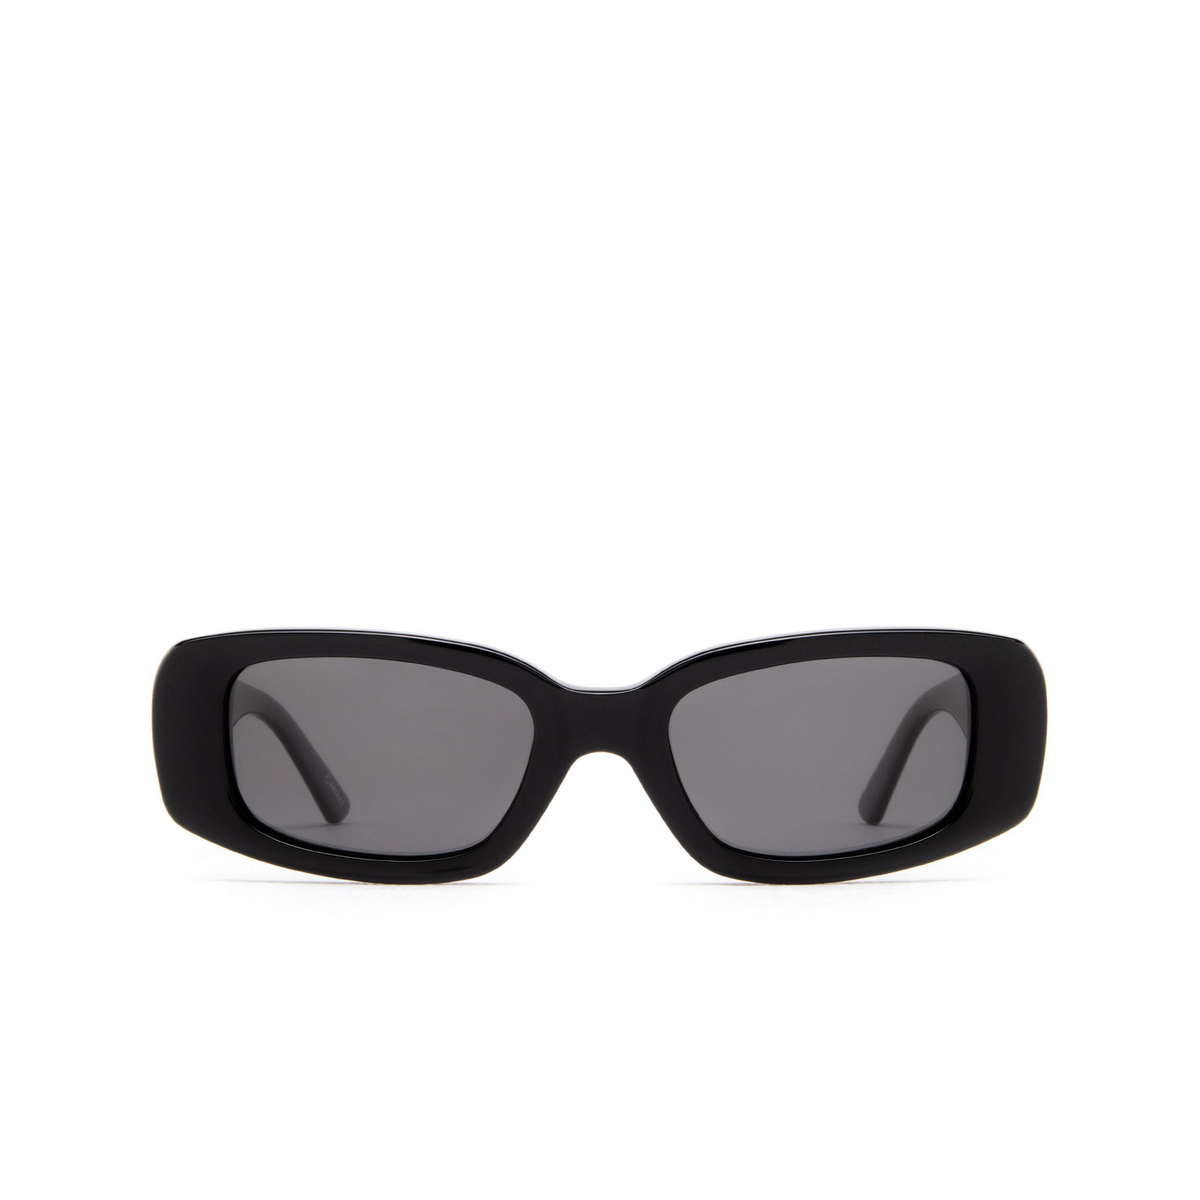 Chimi 10 Sunglasses BLACK - front view